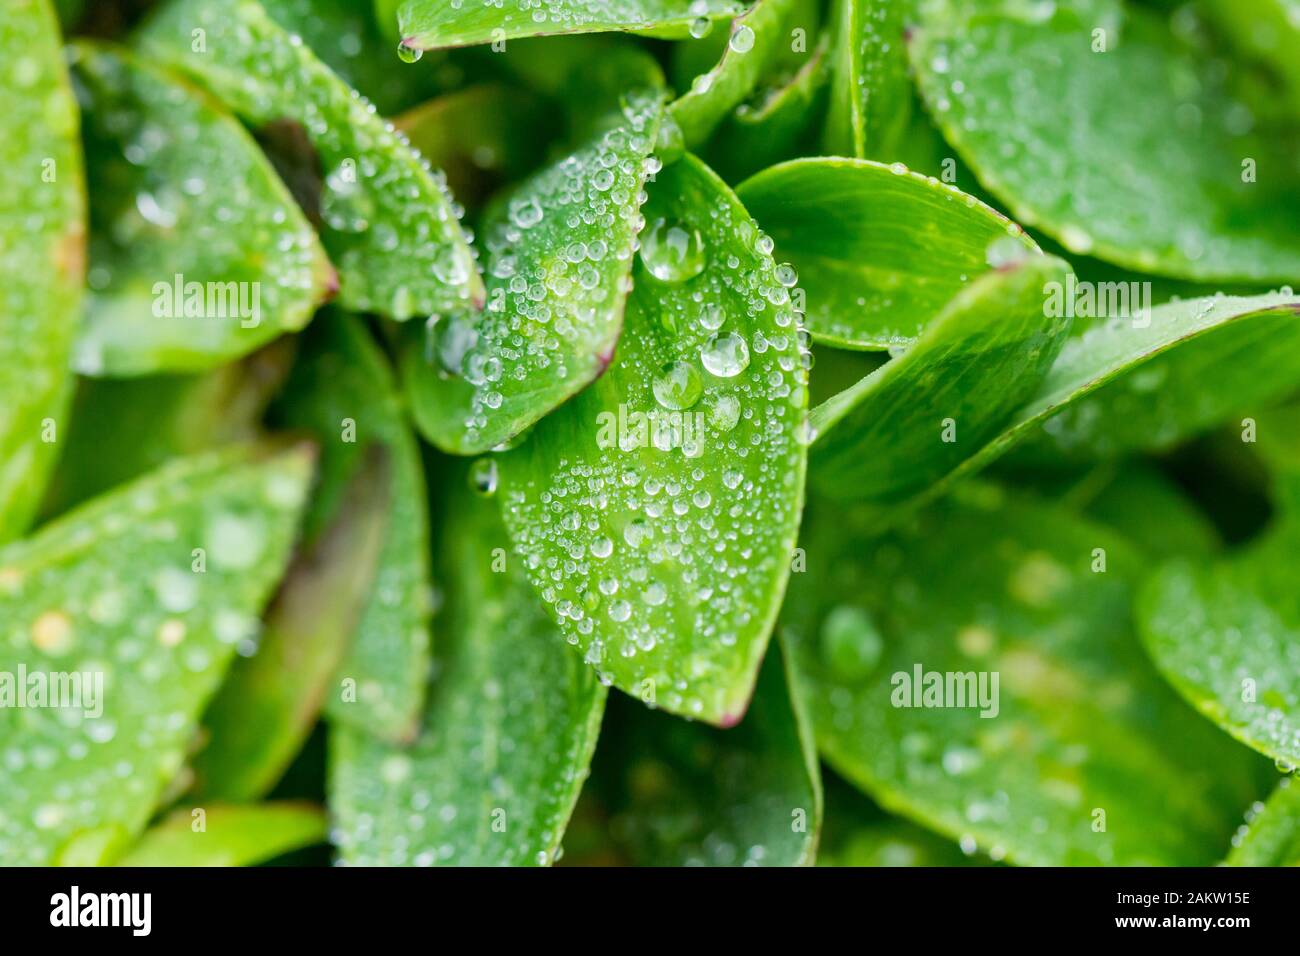 Water rain drops on the leaves of the 'alstroemeria inticancha sunshine' plant in winter, England, UK Stock Photo